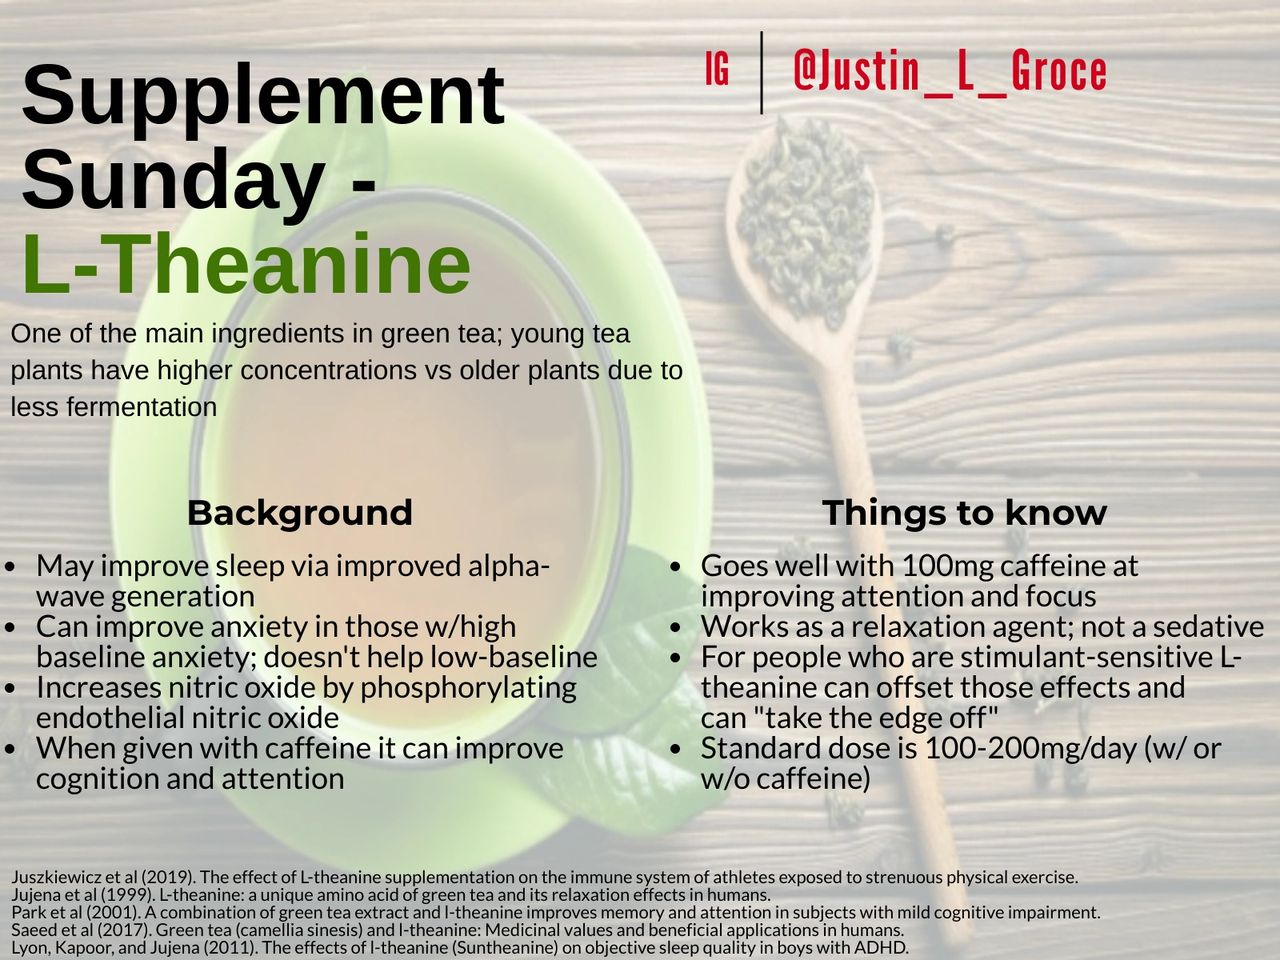 Is L Theanine a Stimulant?